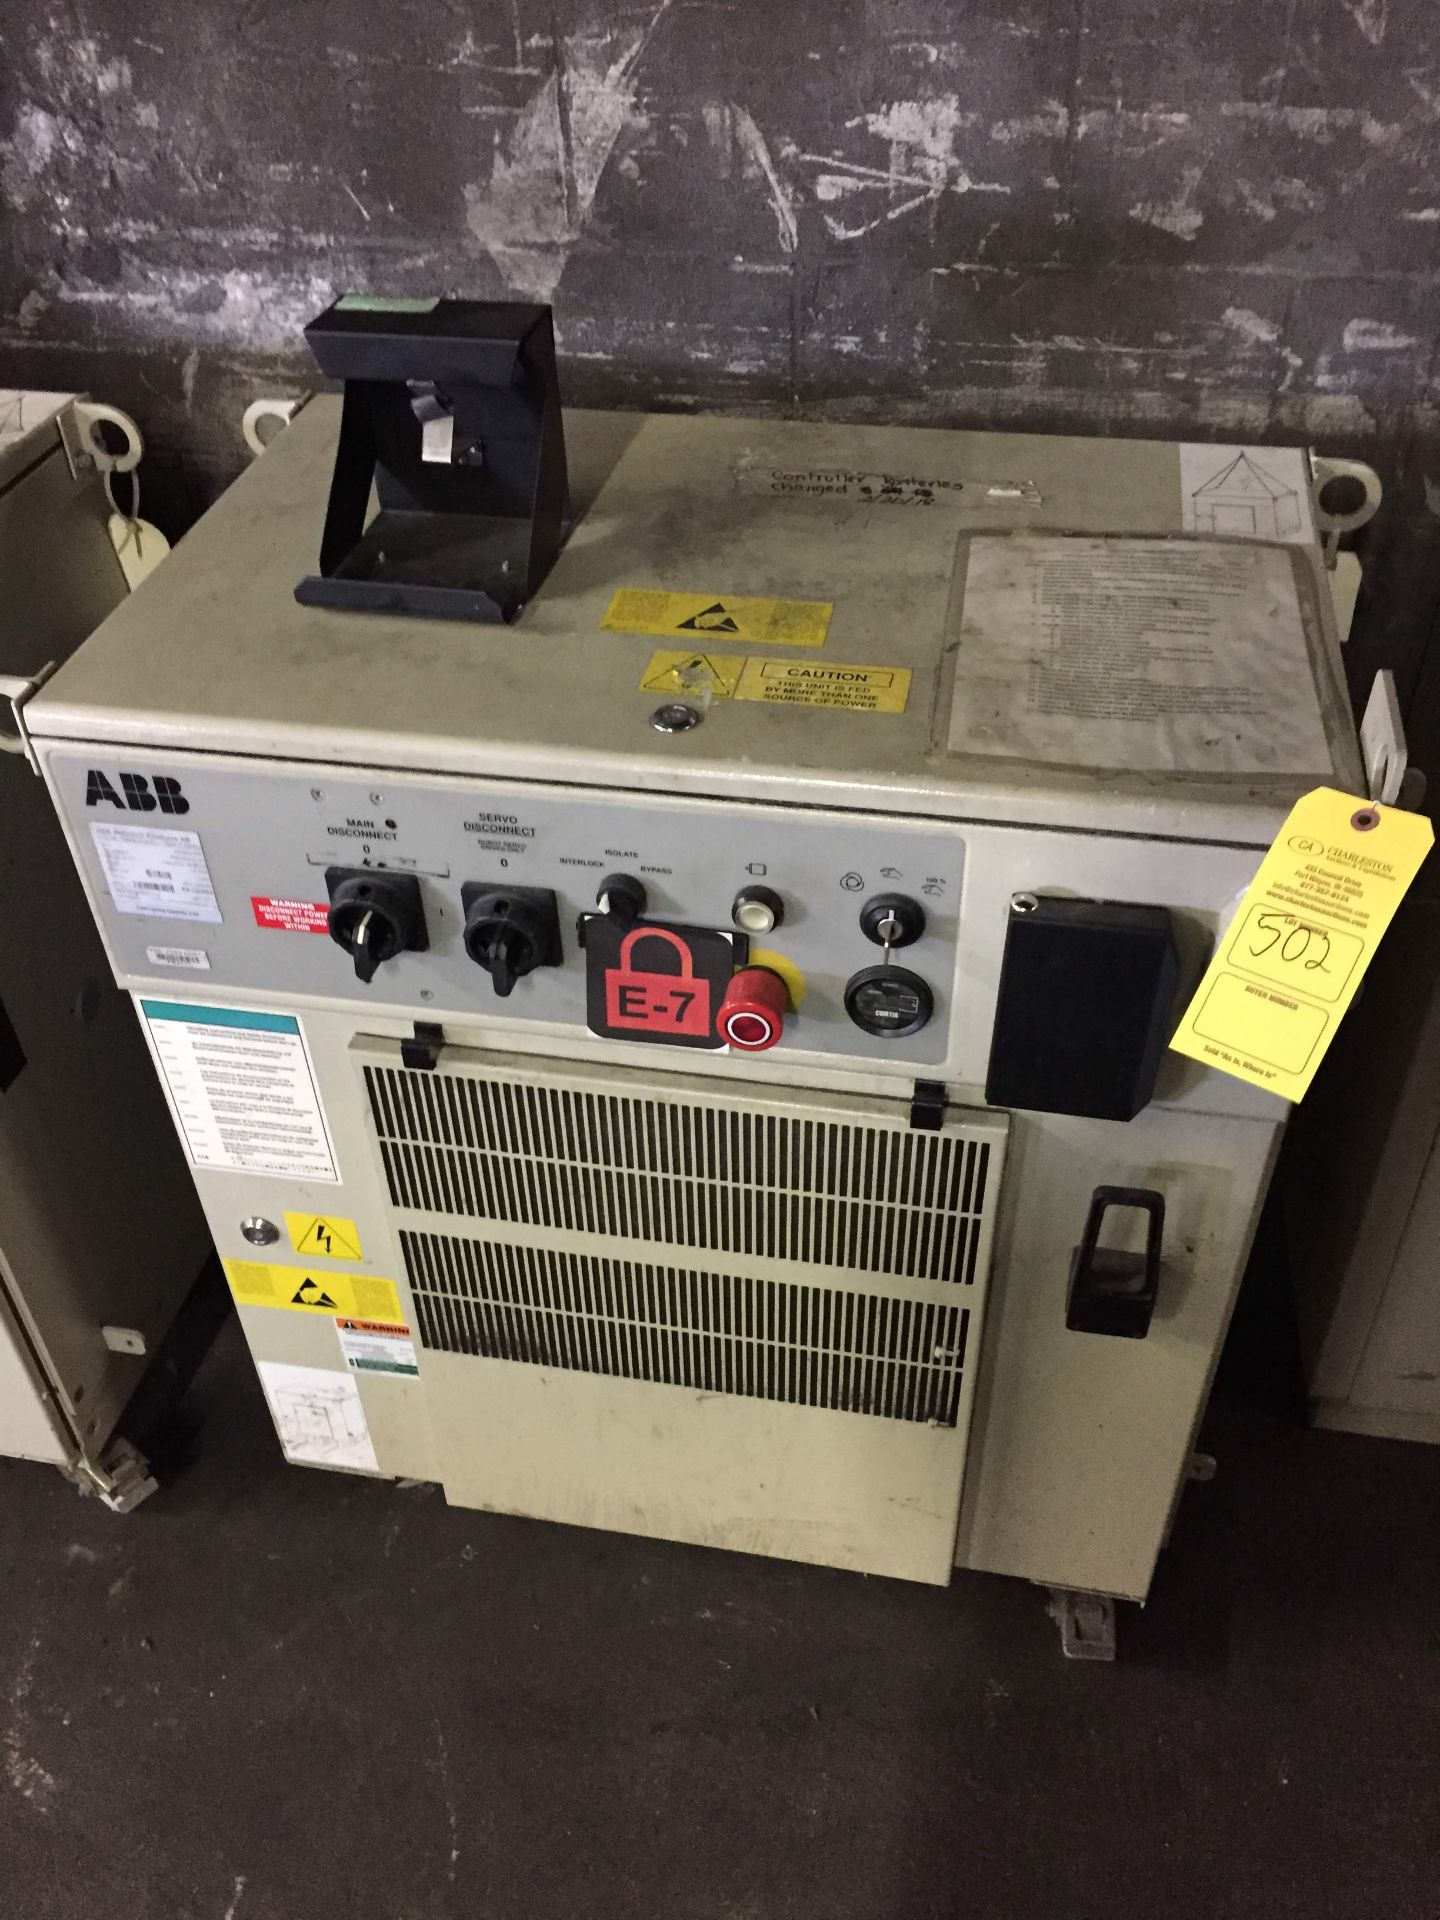 ABB ROBOTIC PRODUCTS AB TYPE: 1RB6400 M97 S# 64-02484(LOCATED AT: 219 MURRAY STREET, FORT WAYNE IN